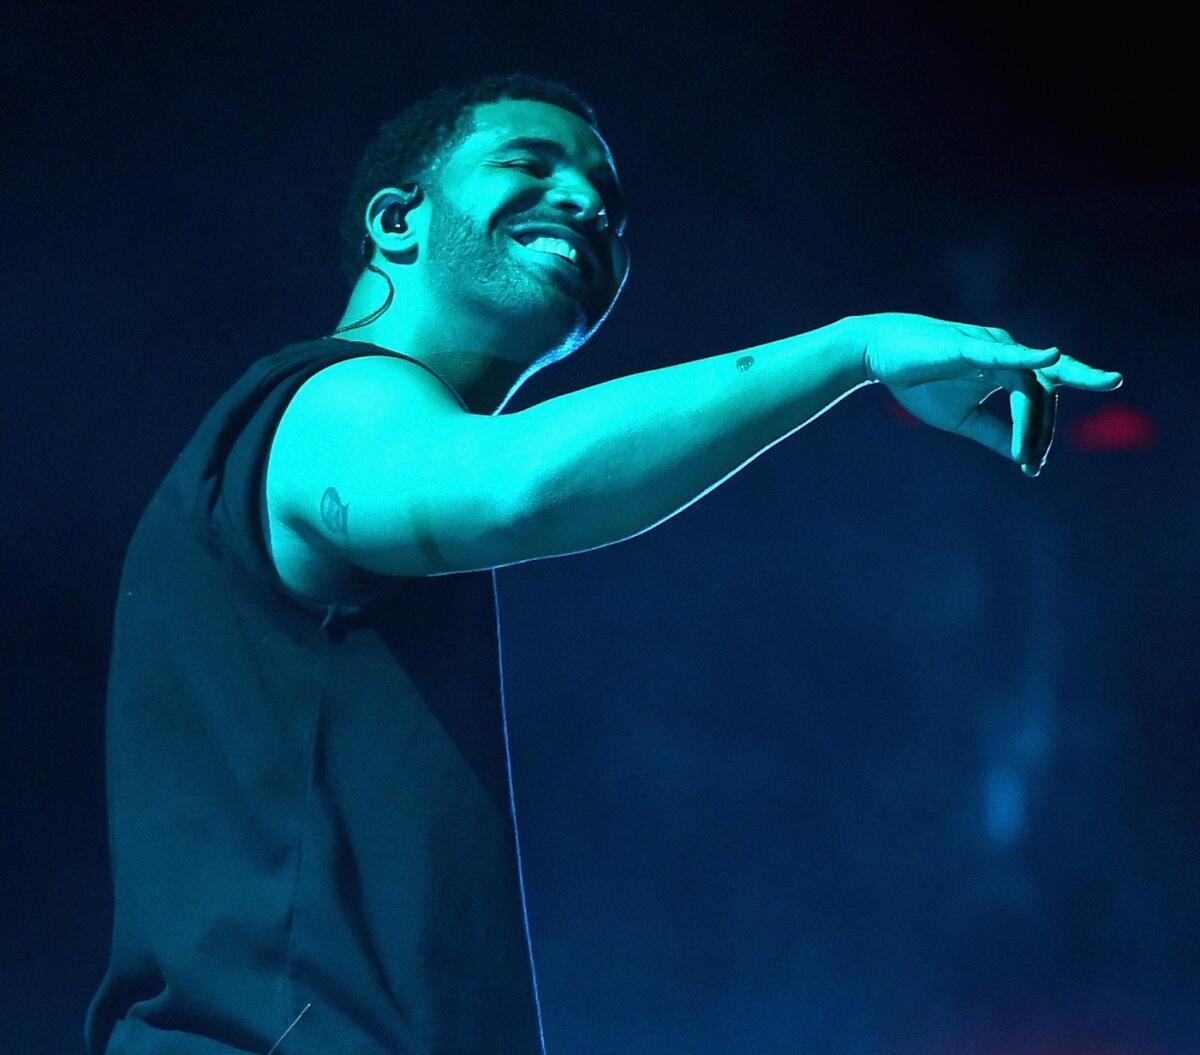 Rapper Drake, performing at the 2015 Coachella Valley Music & Arts Festival in Indio, has scored the No. 1 album for his collaboration with rapper Future and logged his 100th single on the Billboard Hot 100 chart.